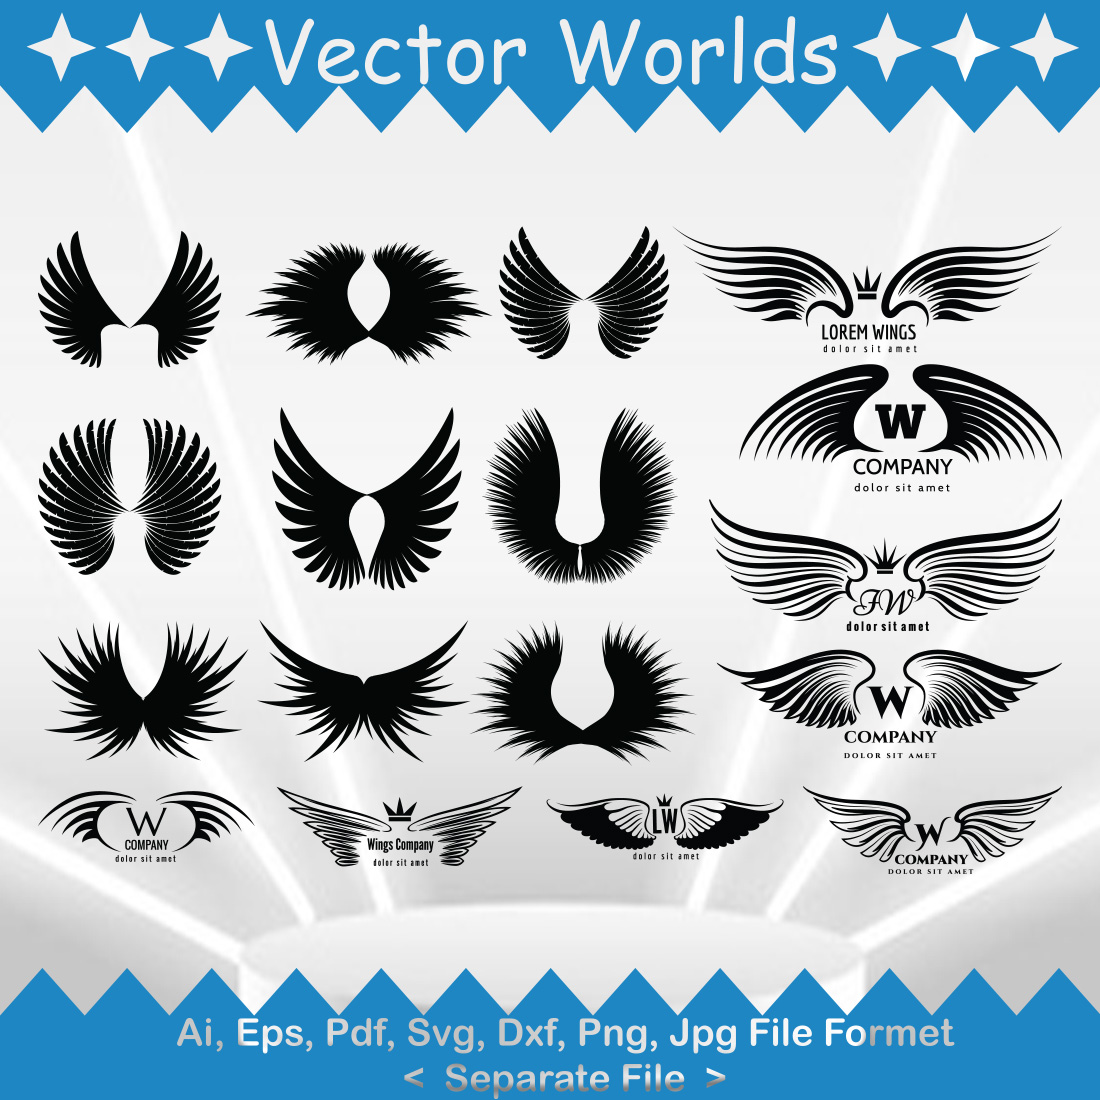 Eagle Wings SVG Vector Design cover image.